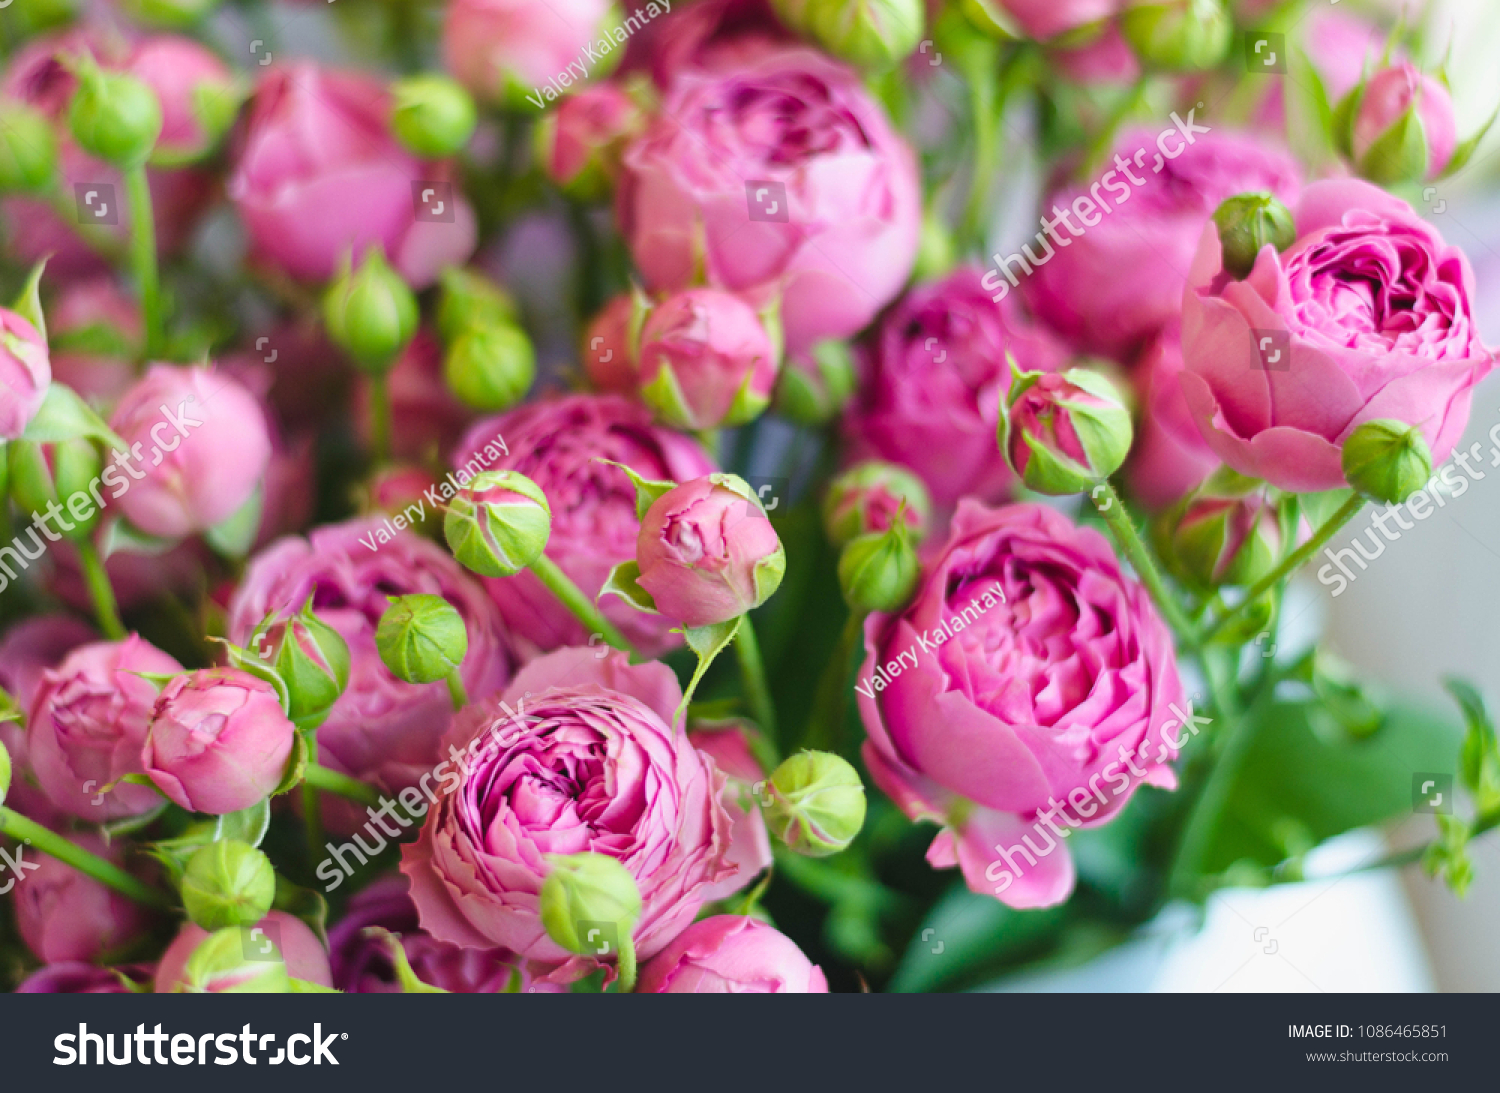 Wedding Bouquet Roses Pions Berries Greens Stock Photo Edit Now 1086465851